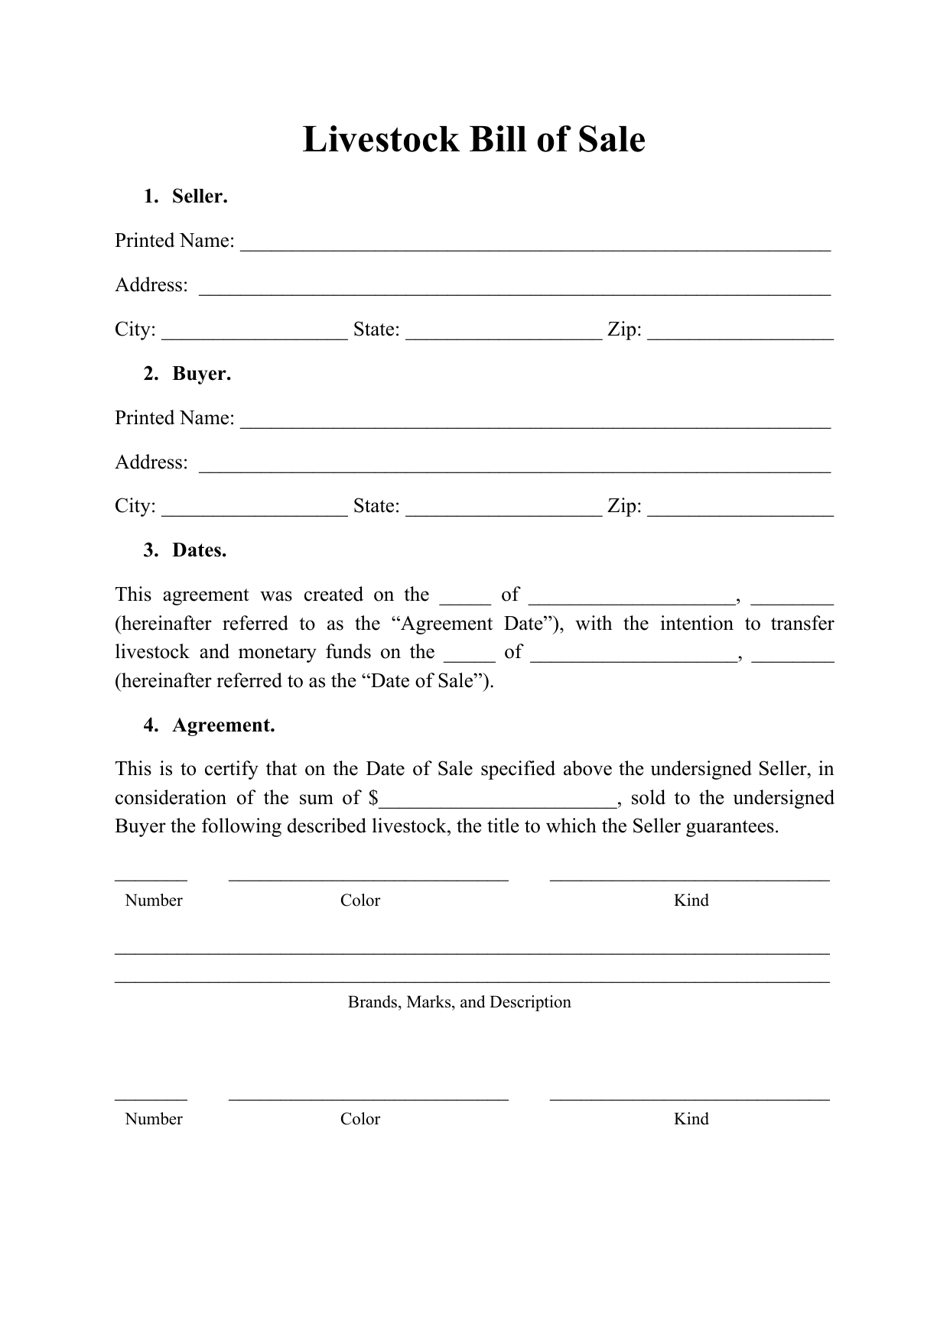 free-horse-bill-of-sale-form-template